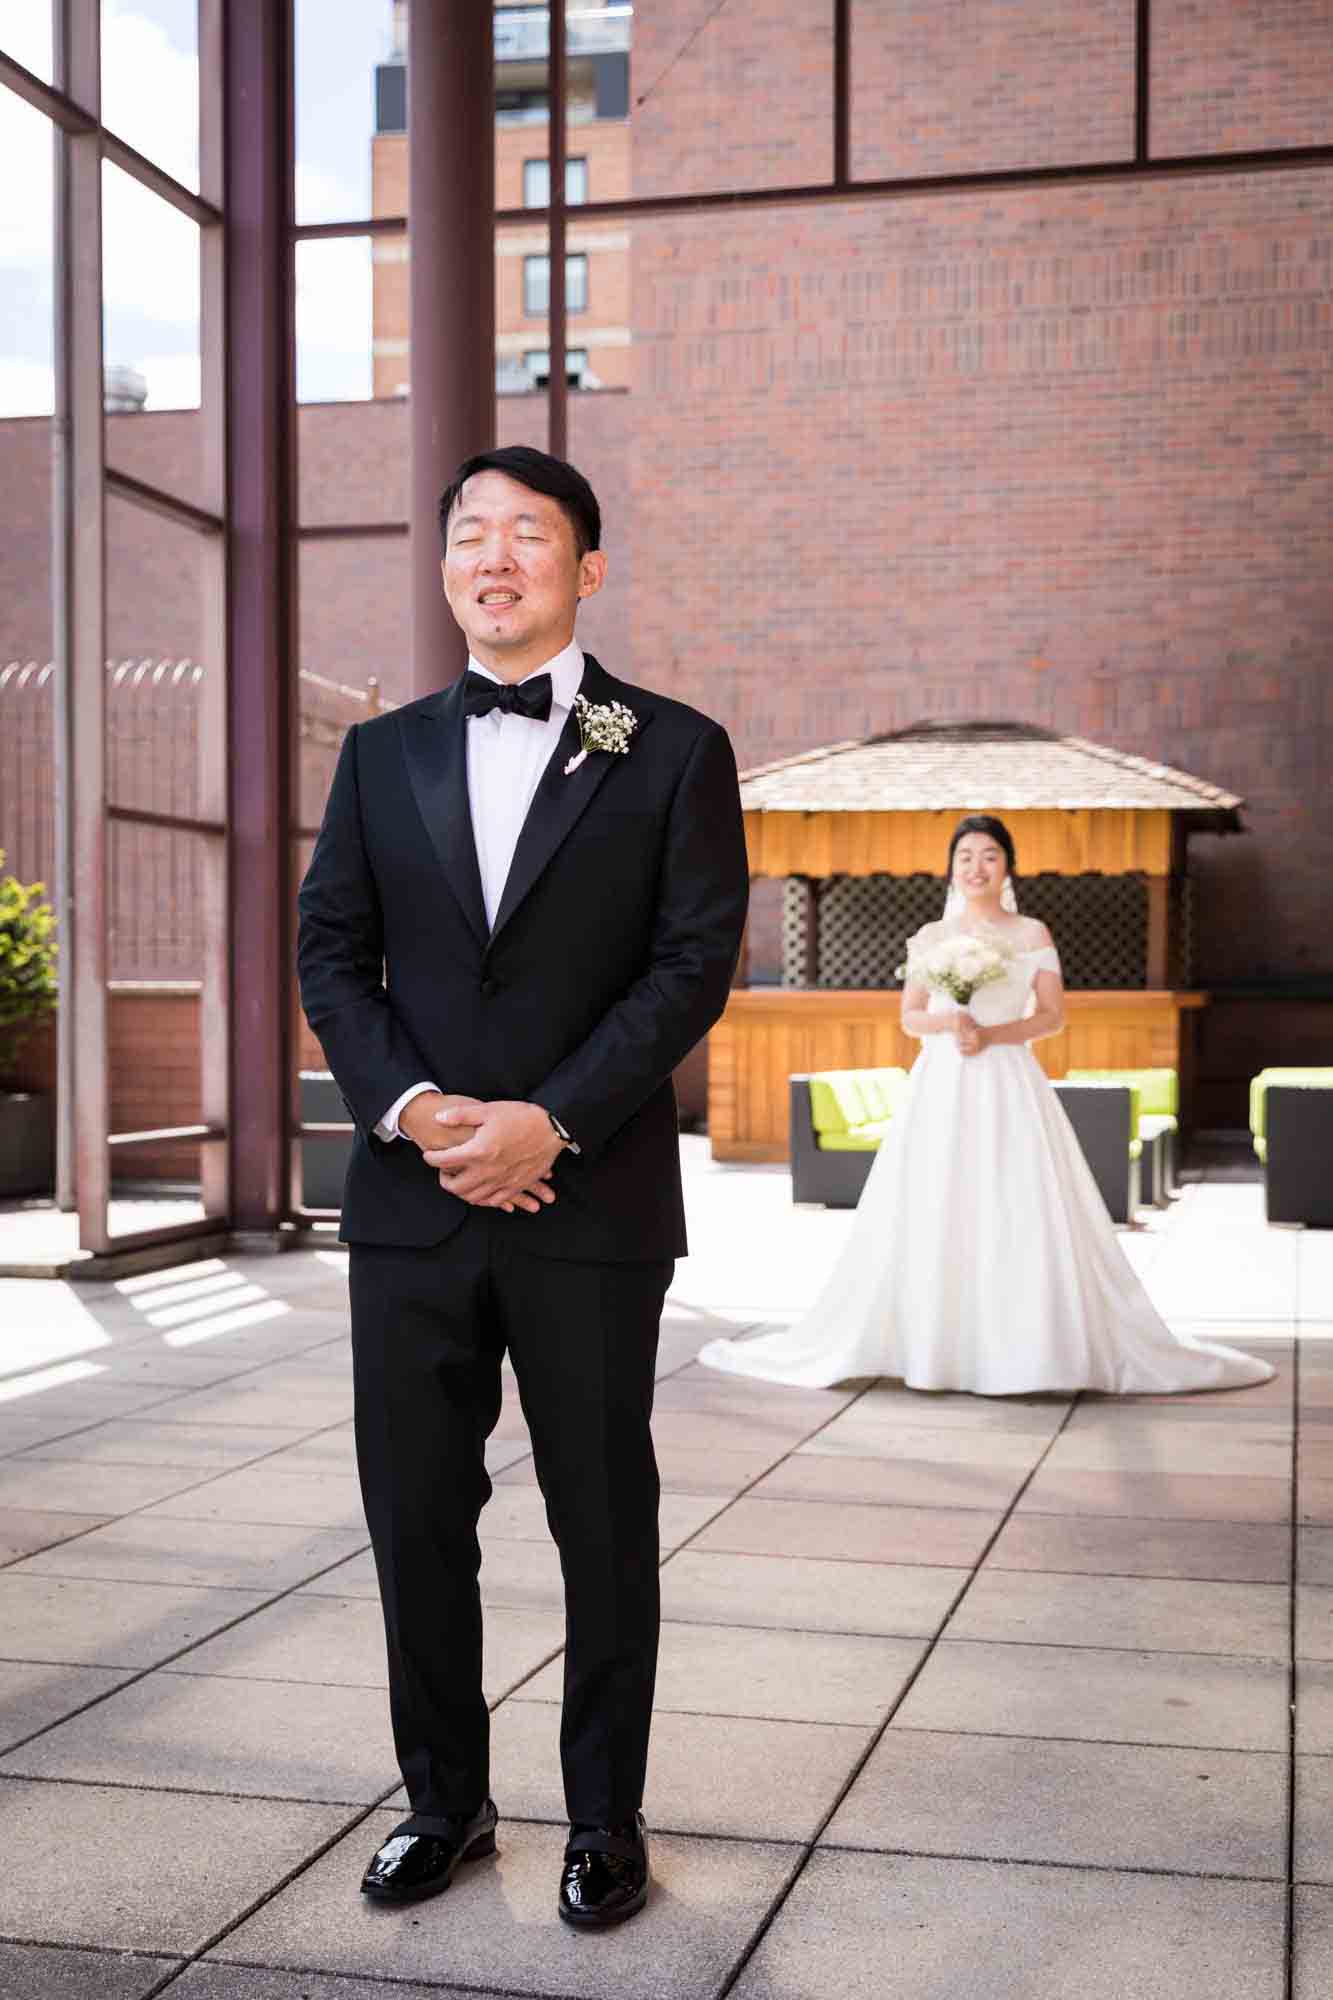 Groom standing with eyes closed waiting for bride behind him during first look at a Sheraton LaGuardia East Hotel wedding